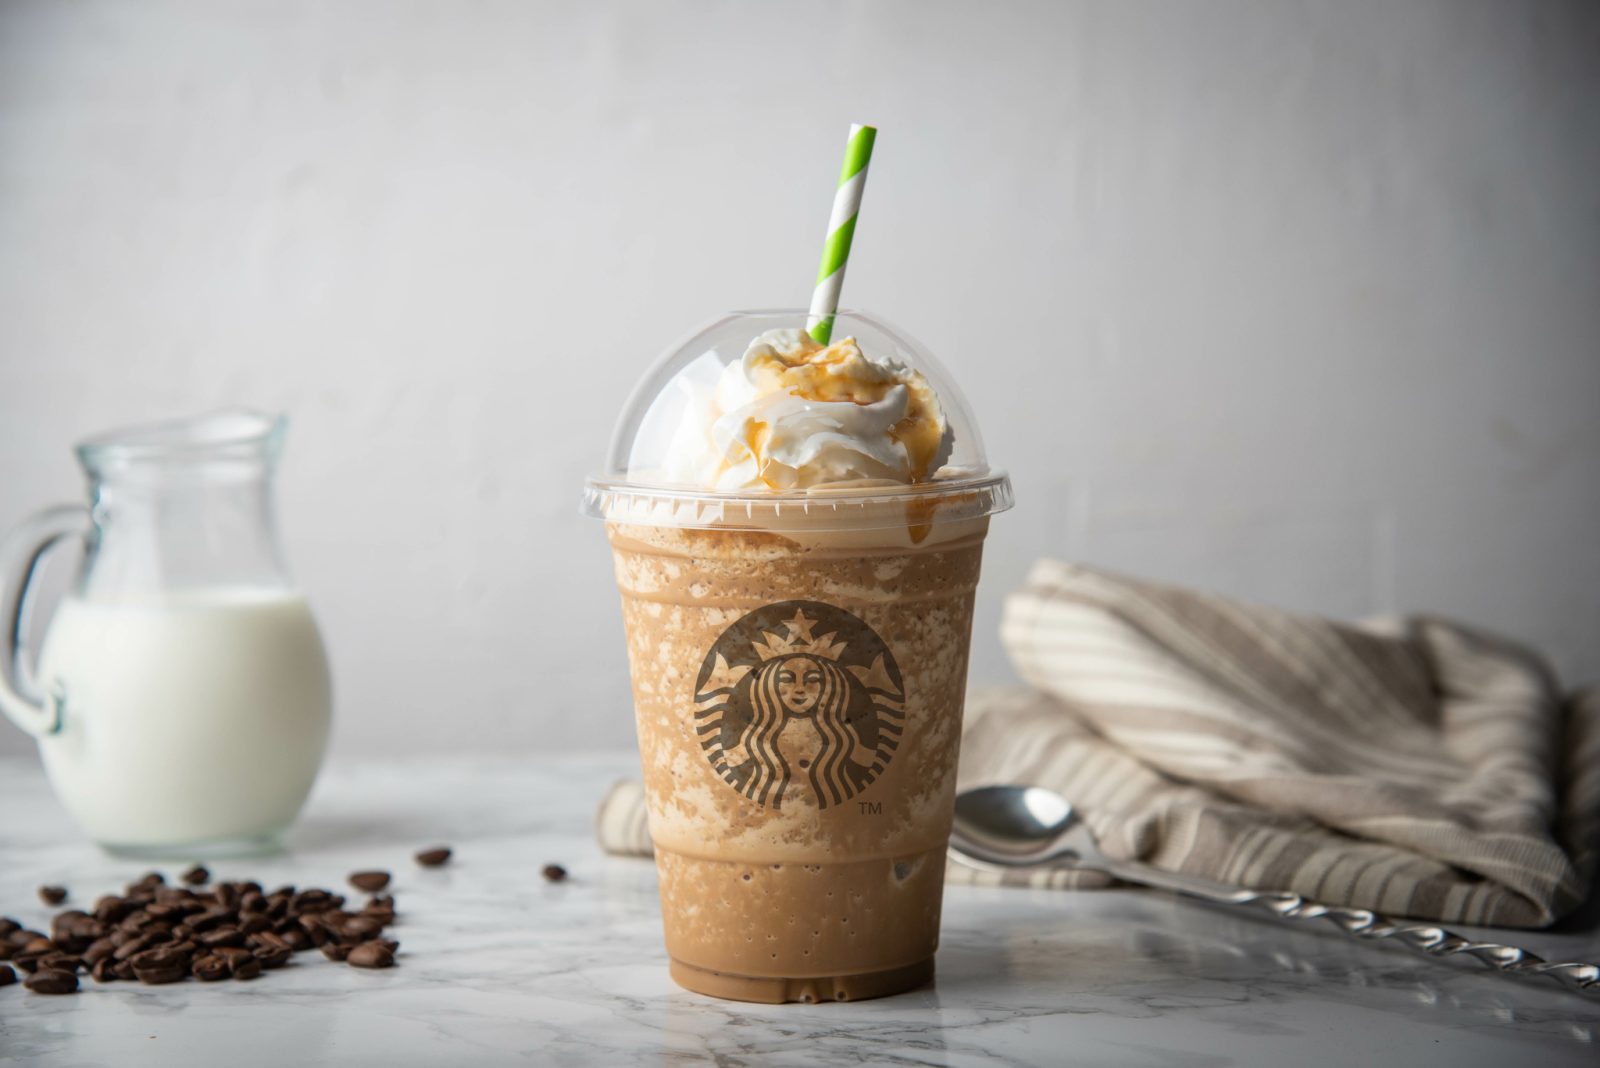 Starbucks Caramel Rrappuccino with whipped cream